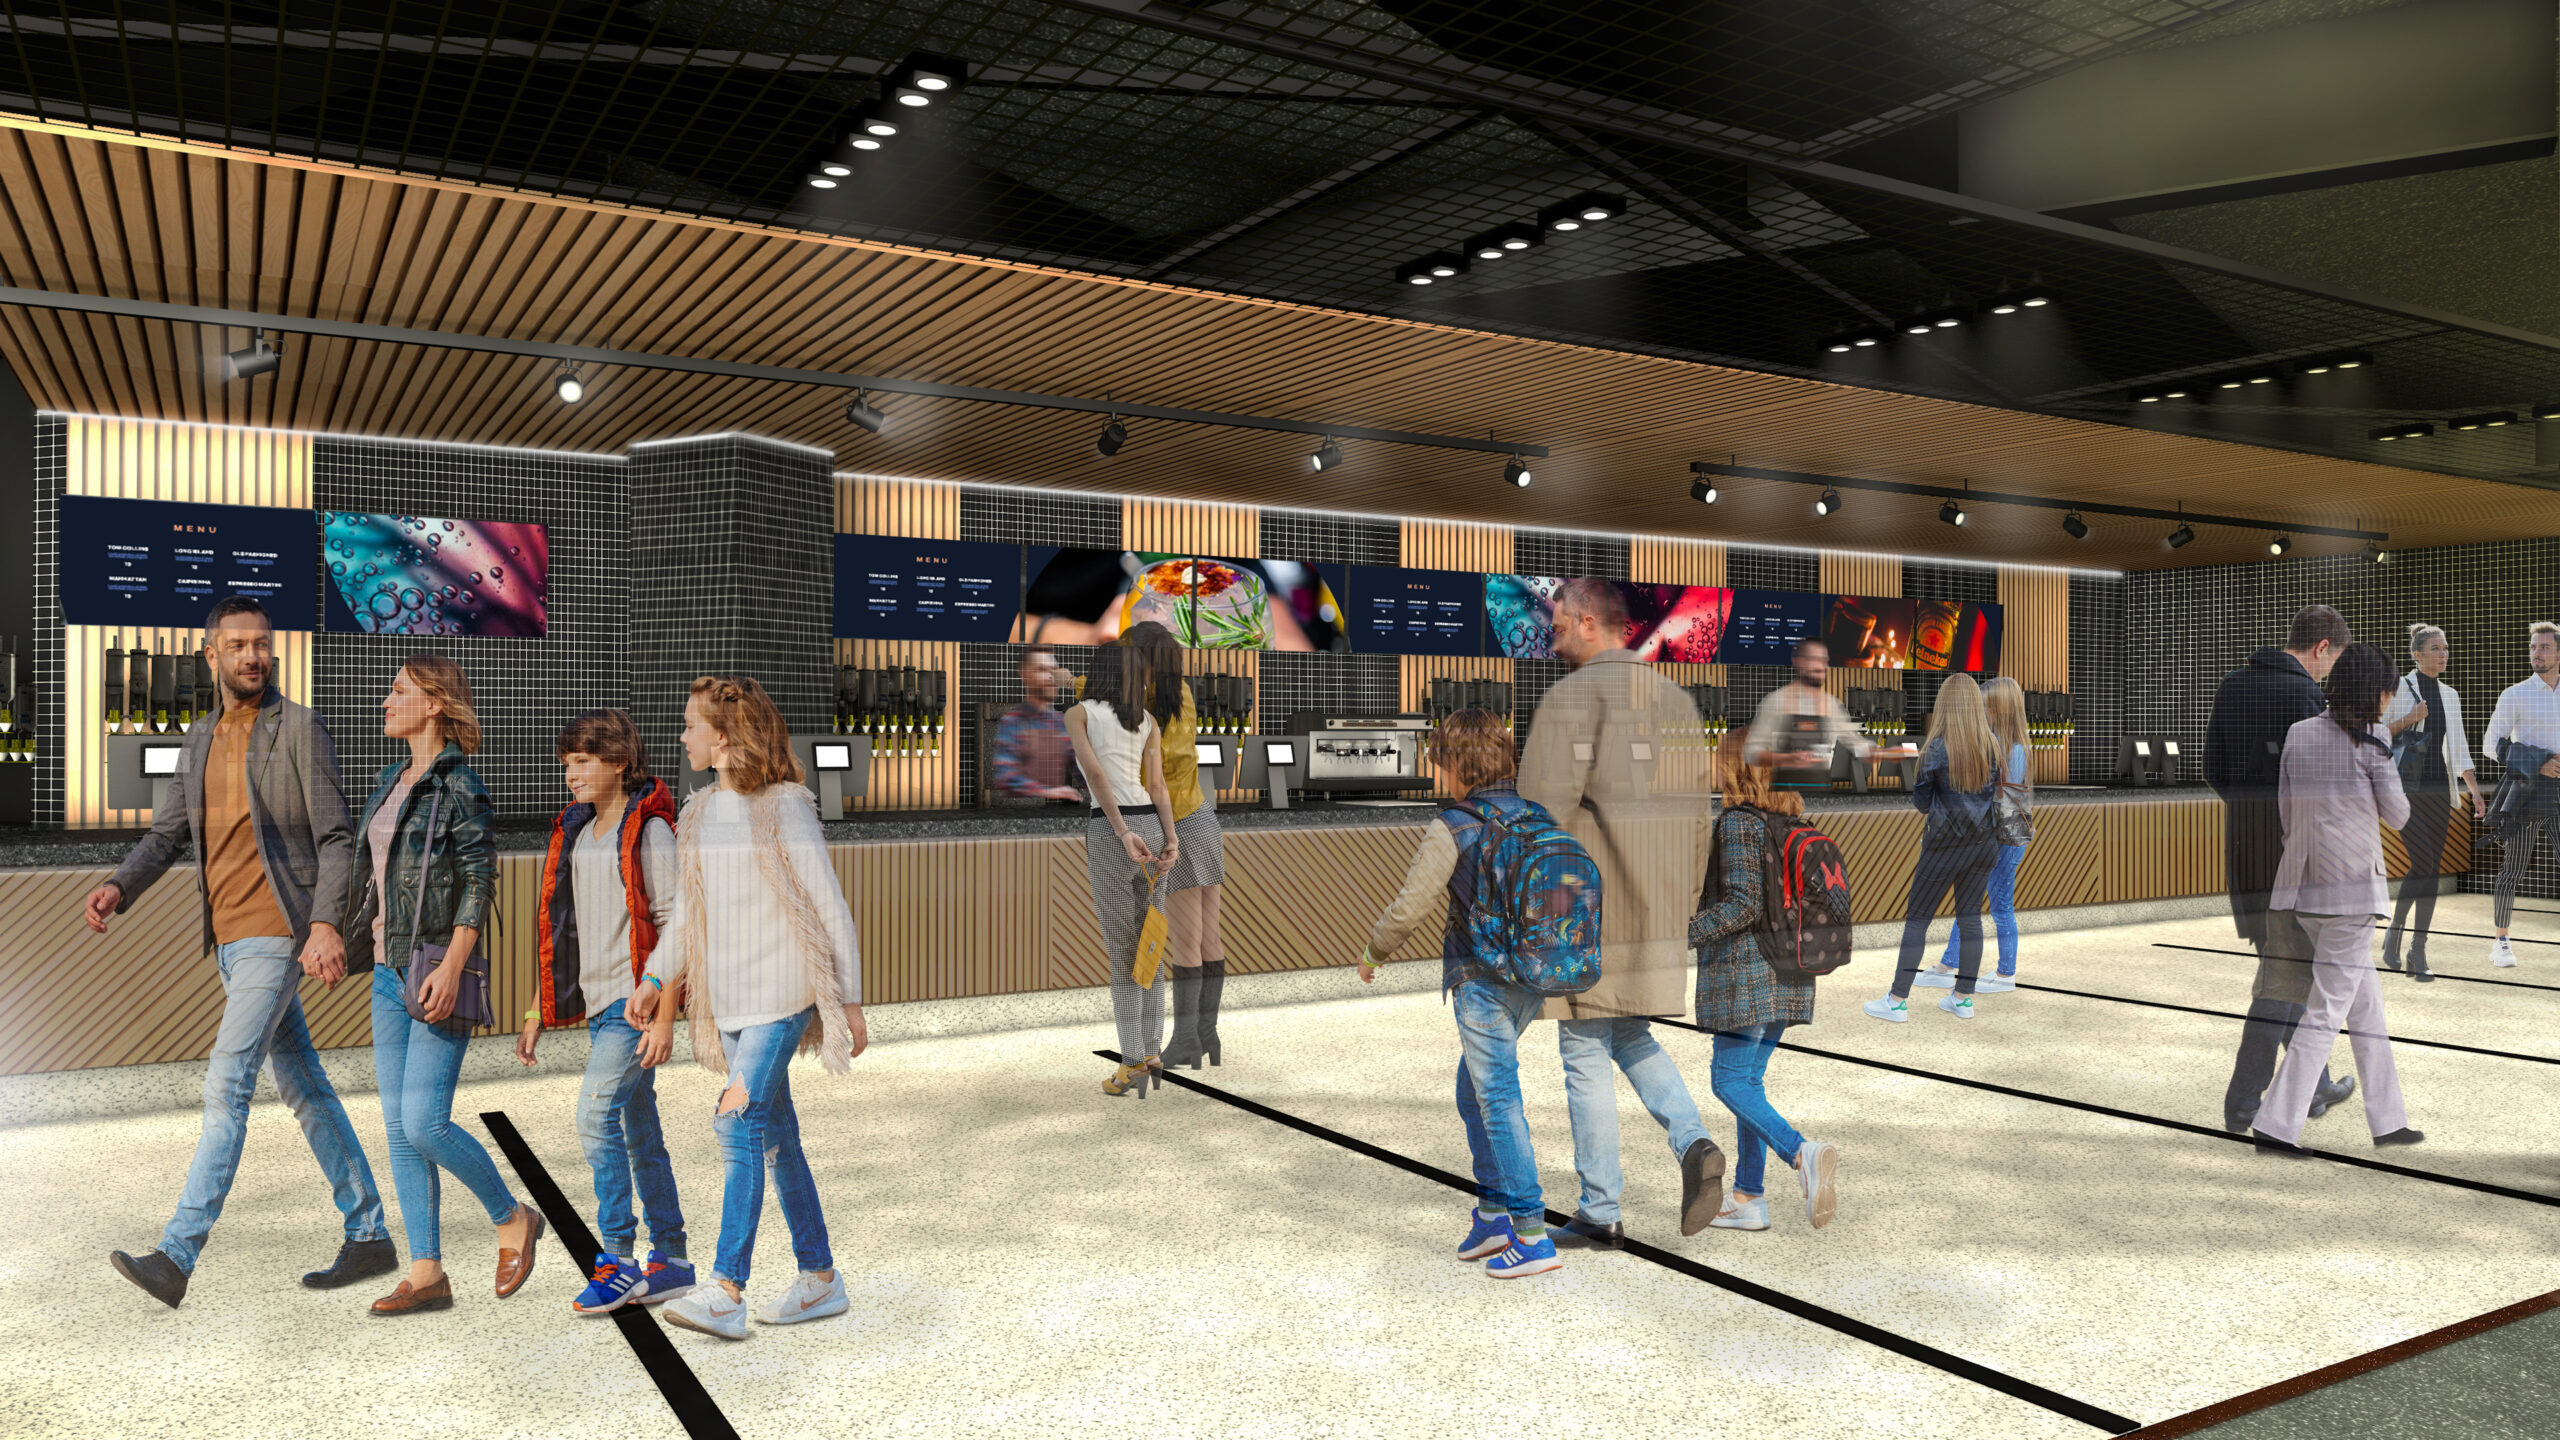 The AO Arena's £50m redevelopment includes new event bars